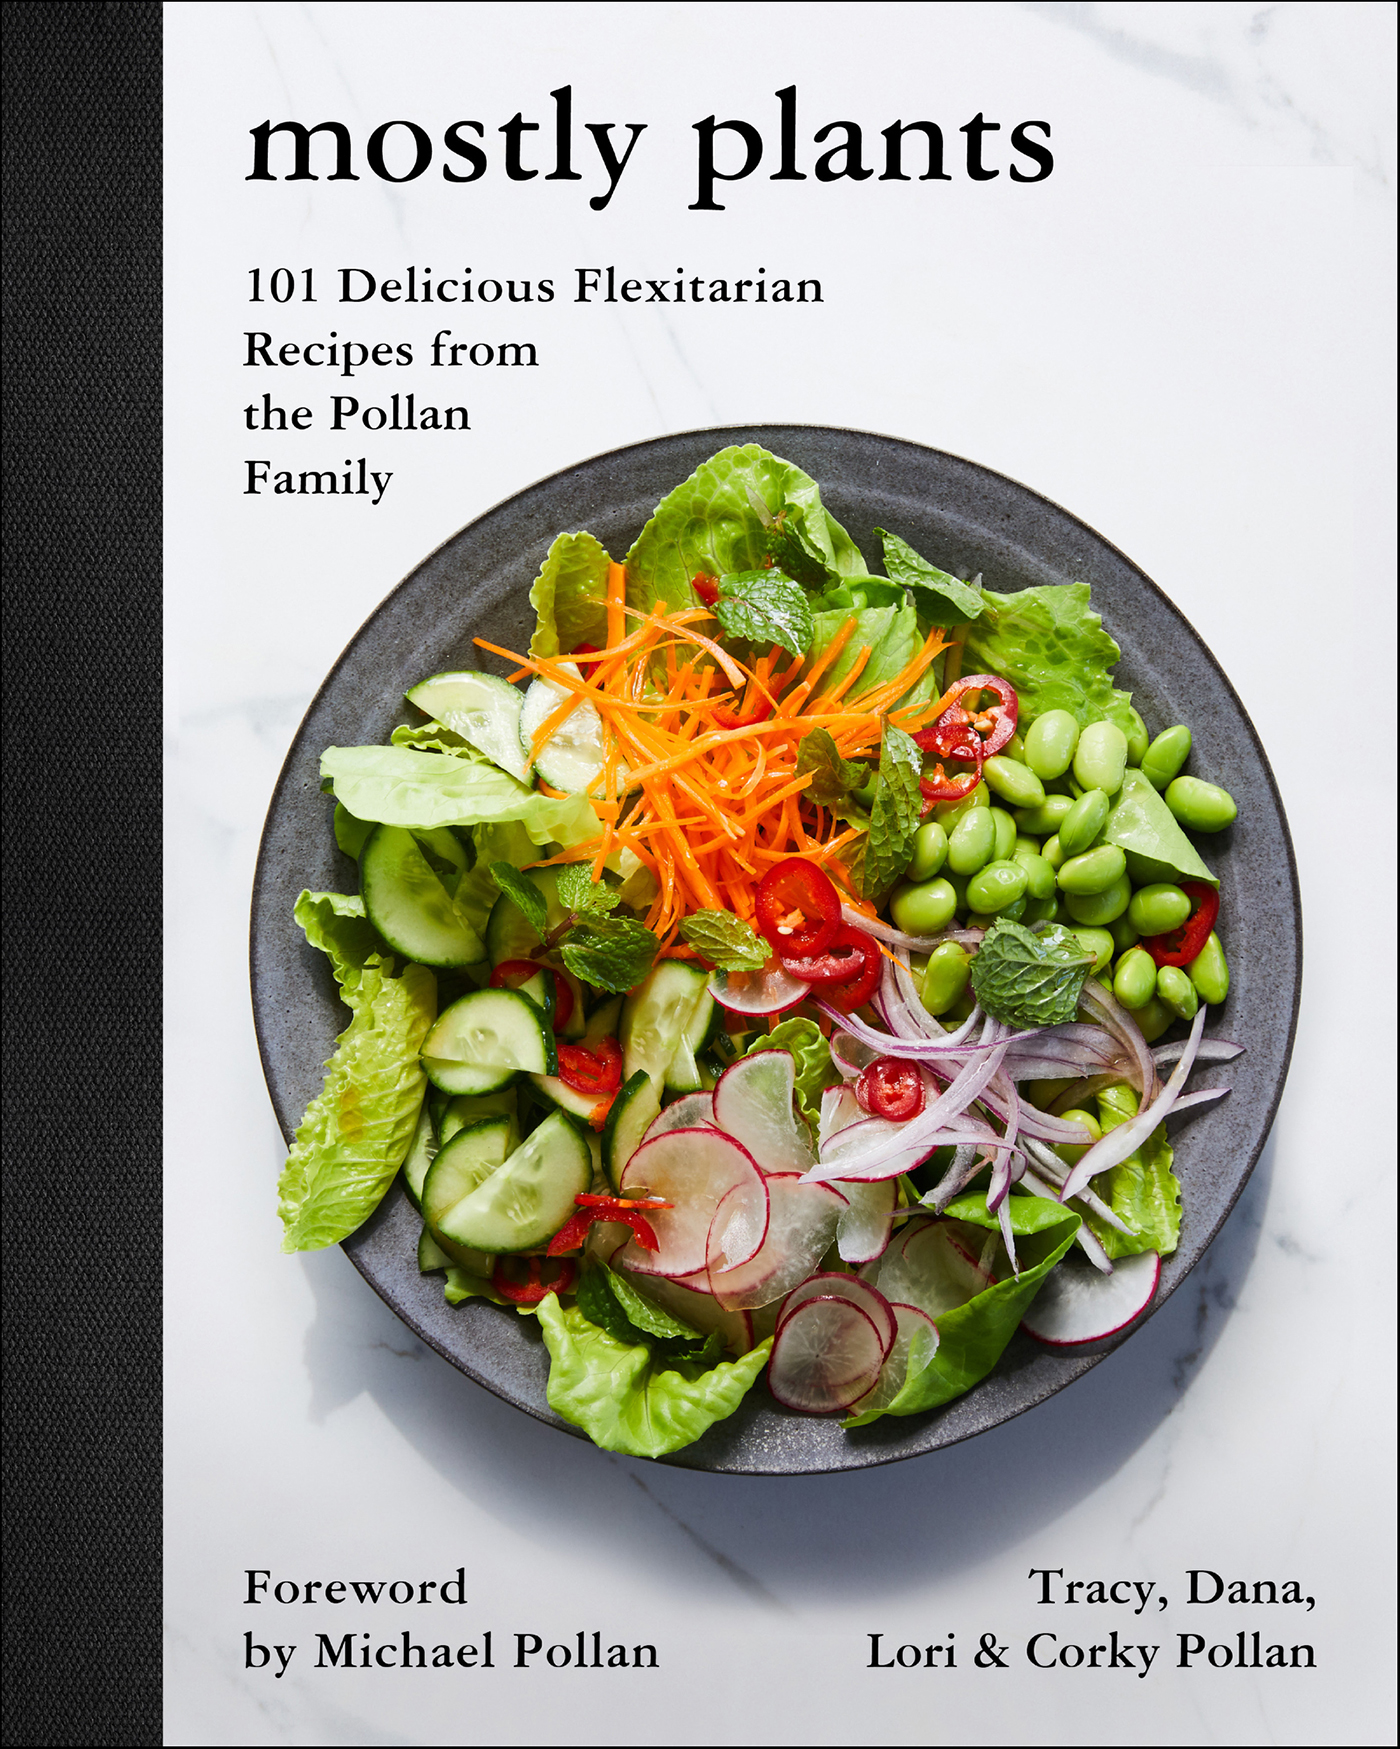 Mostly plants 101 delicious flexitarian recipes from the Pollan family cover image